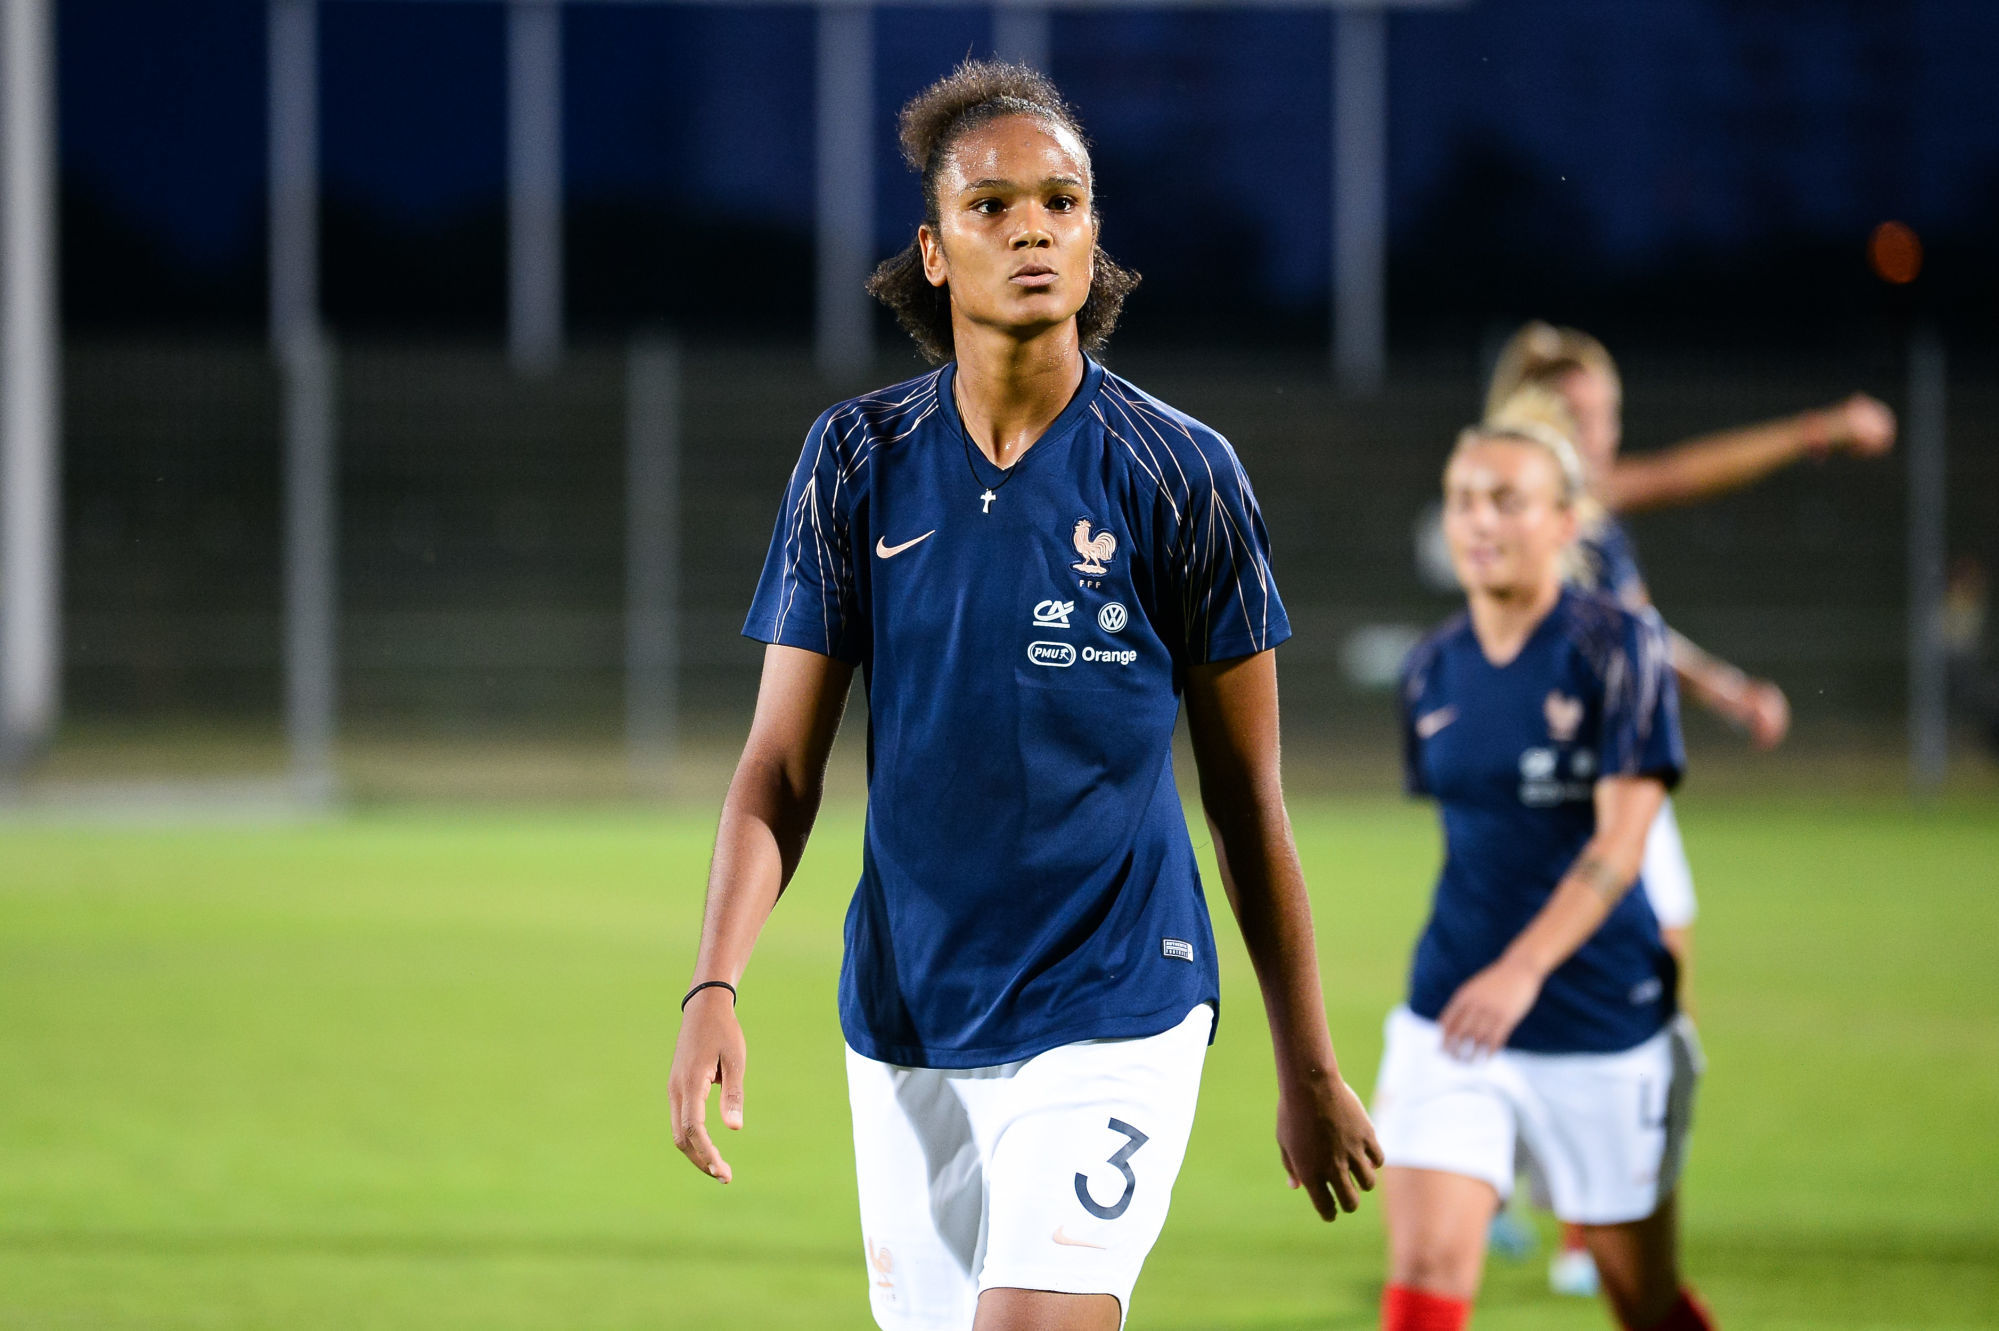 France's defender Wendie Renard before the Women's International Football Friendly match between France and Spain at Stade Gabriel Montpied on August 31, 2019 in Clermont-Ferrand, France. (Photo by Baptiste Fernandez/Icon Sport)